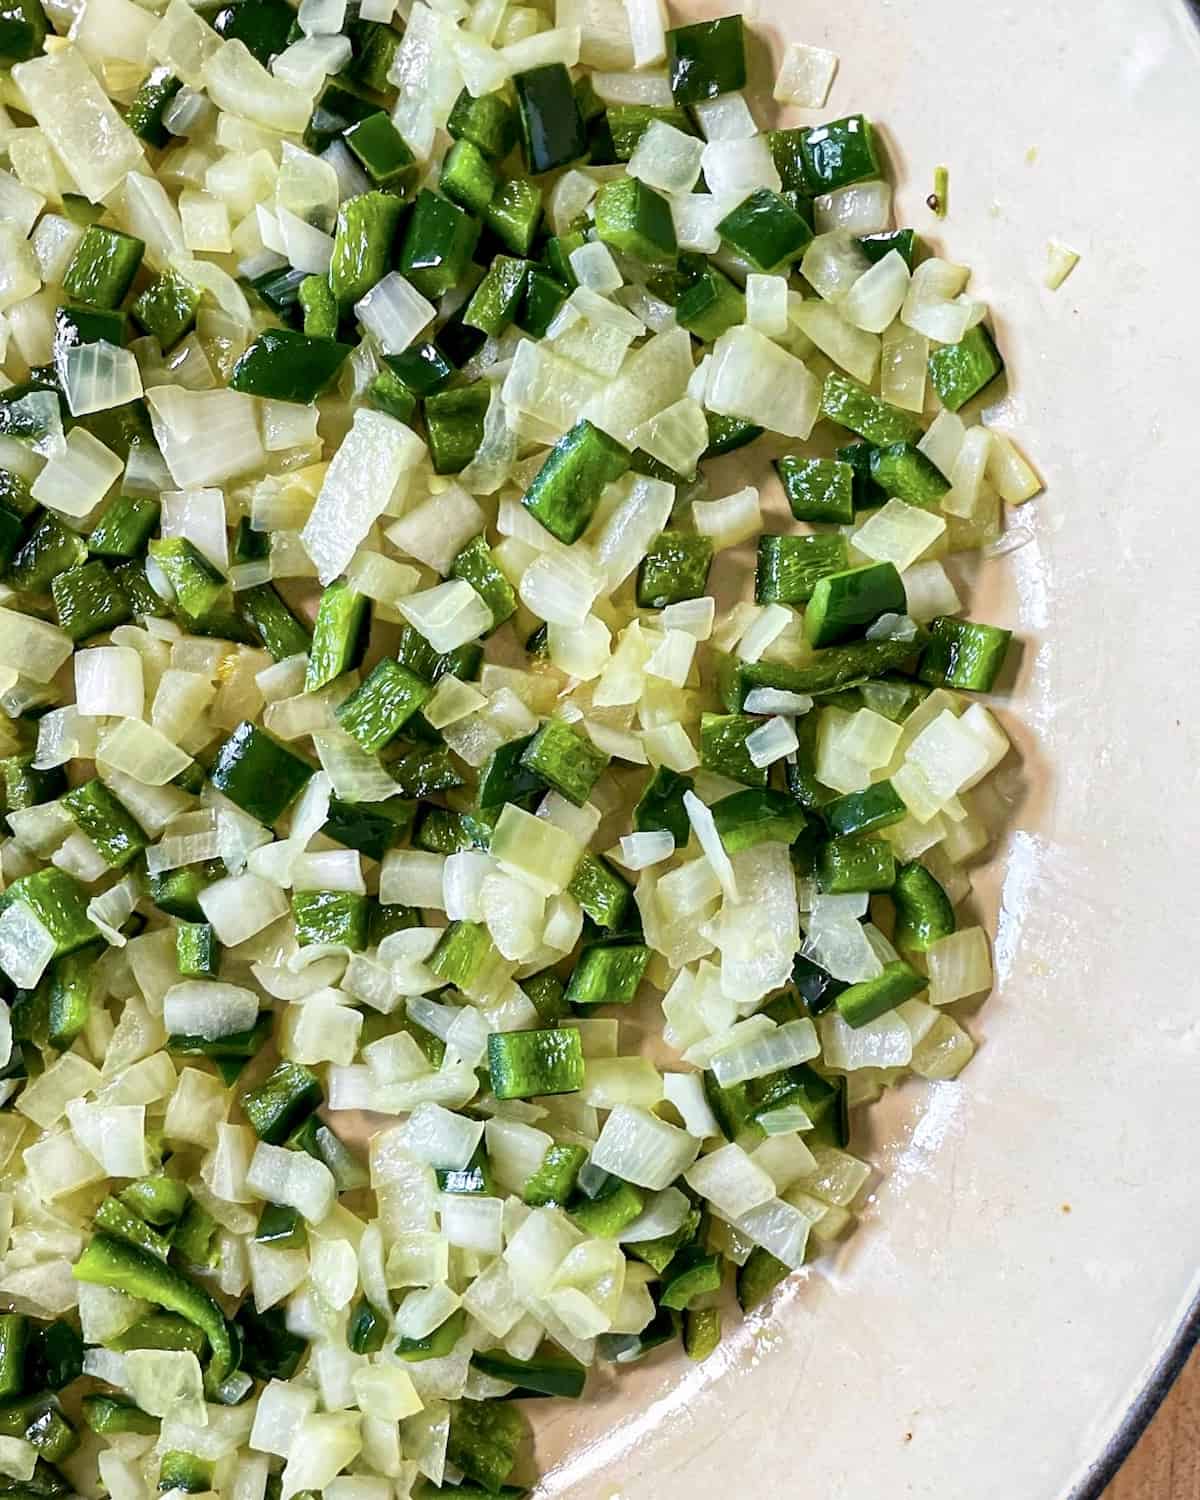 Diced yellow onion and poblano peppers that have been sautéd until translucent in a skillet.